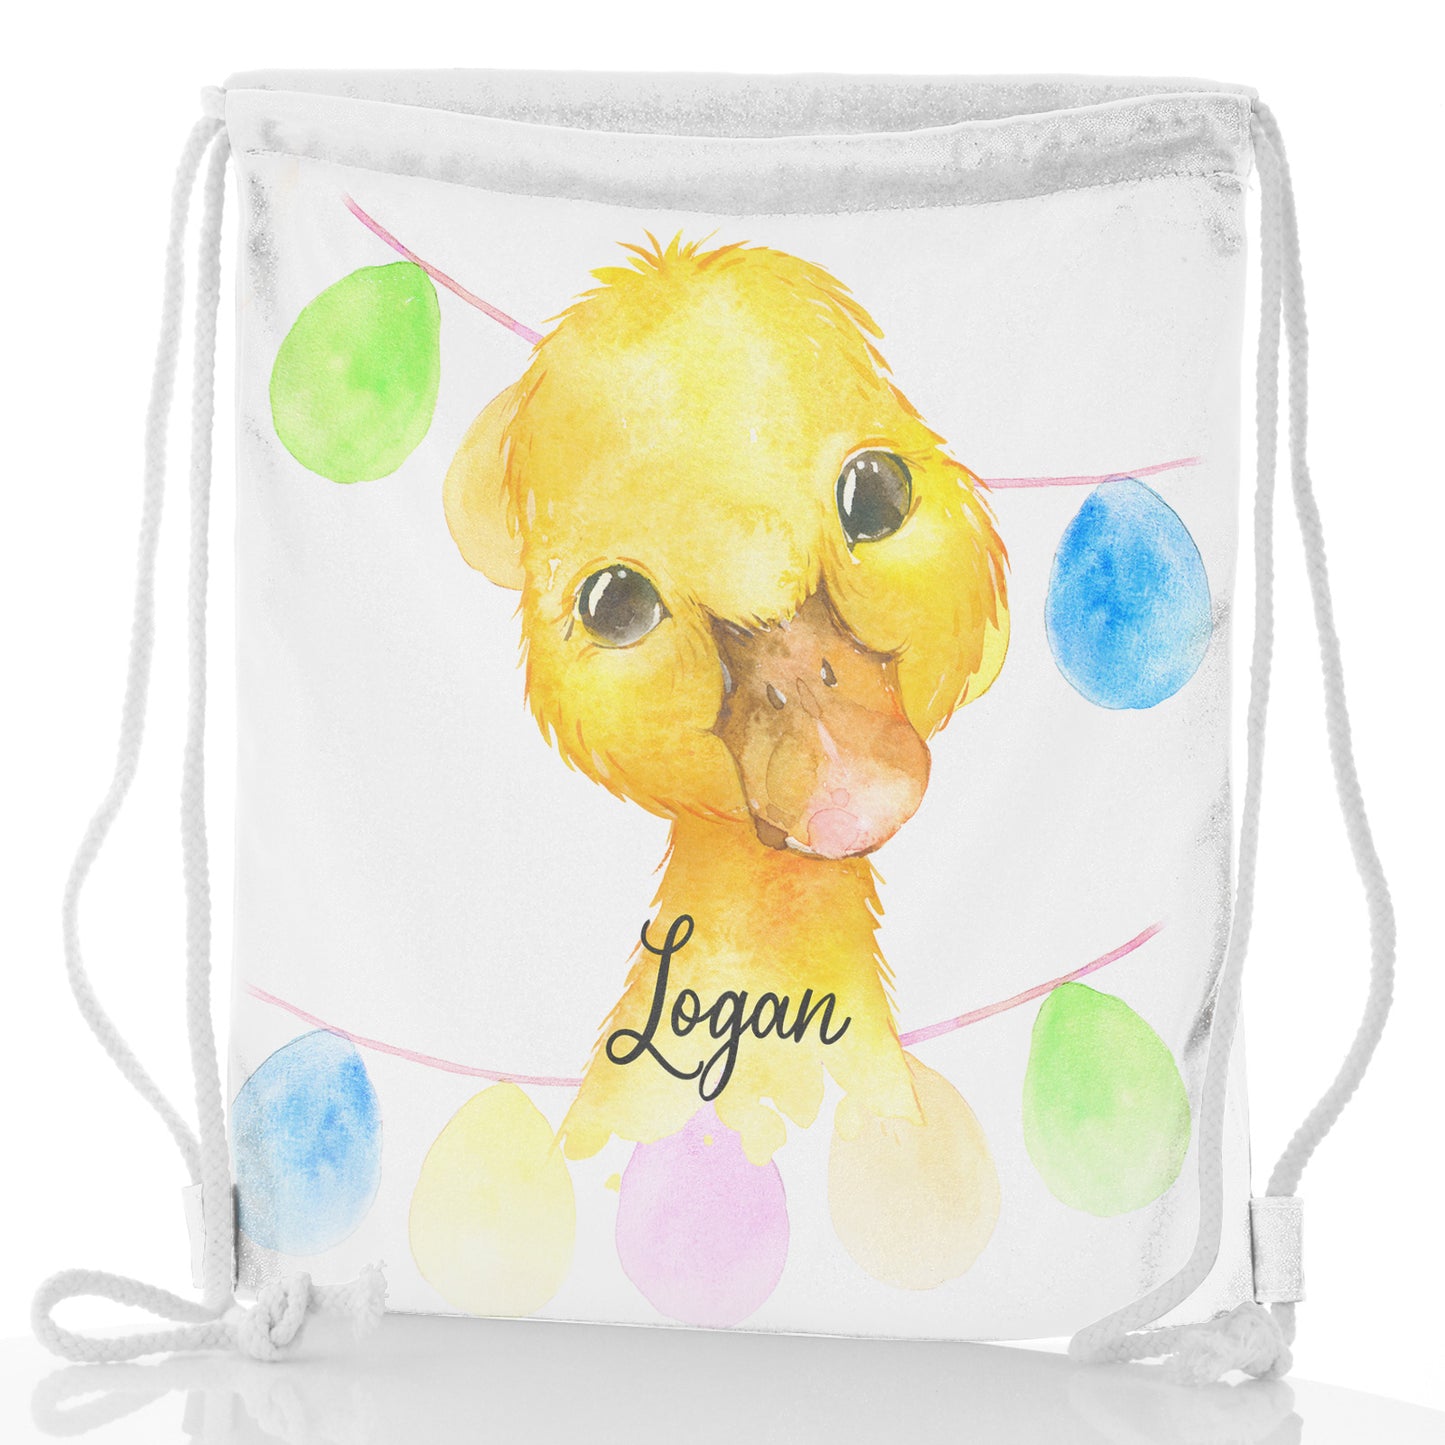 Personalised Glitter Drawstring Backpack with Yellow Duck Multicolour Buntin and Cute Text